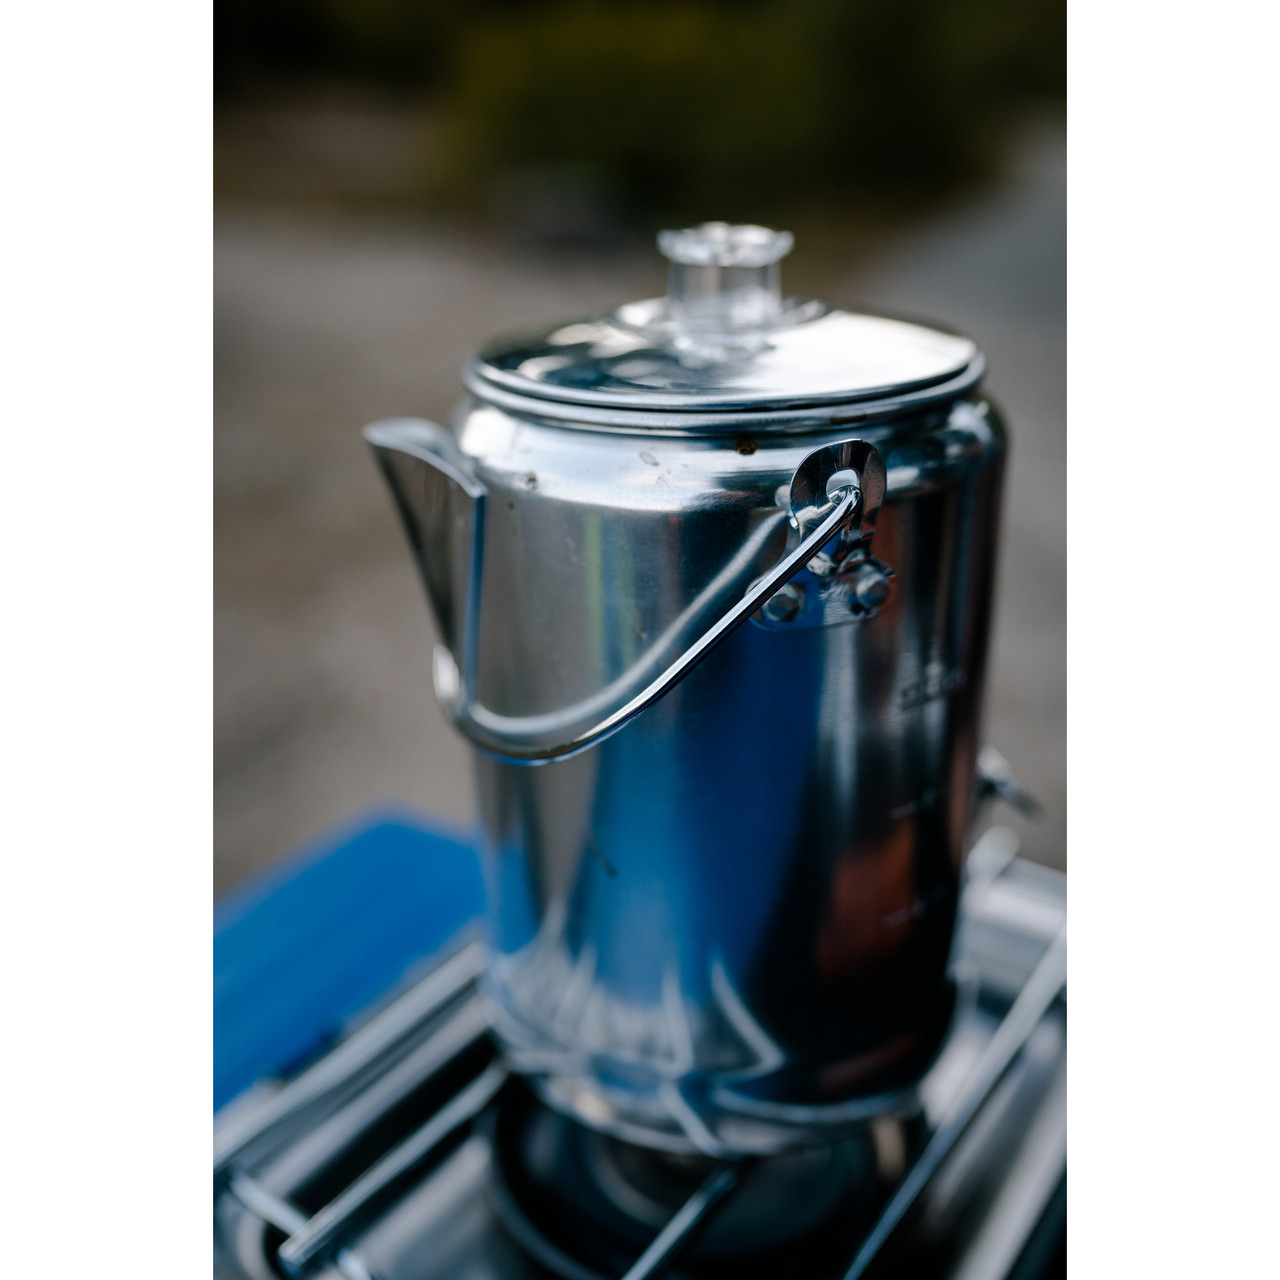 Coghlans 9-Cup Aluminum Camping Coffee Pot - Bliffert Lumber and Hardware